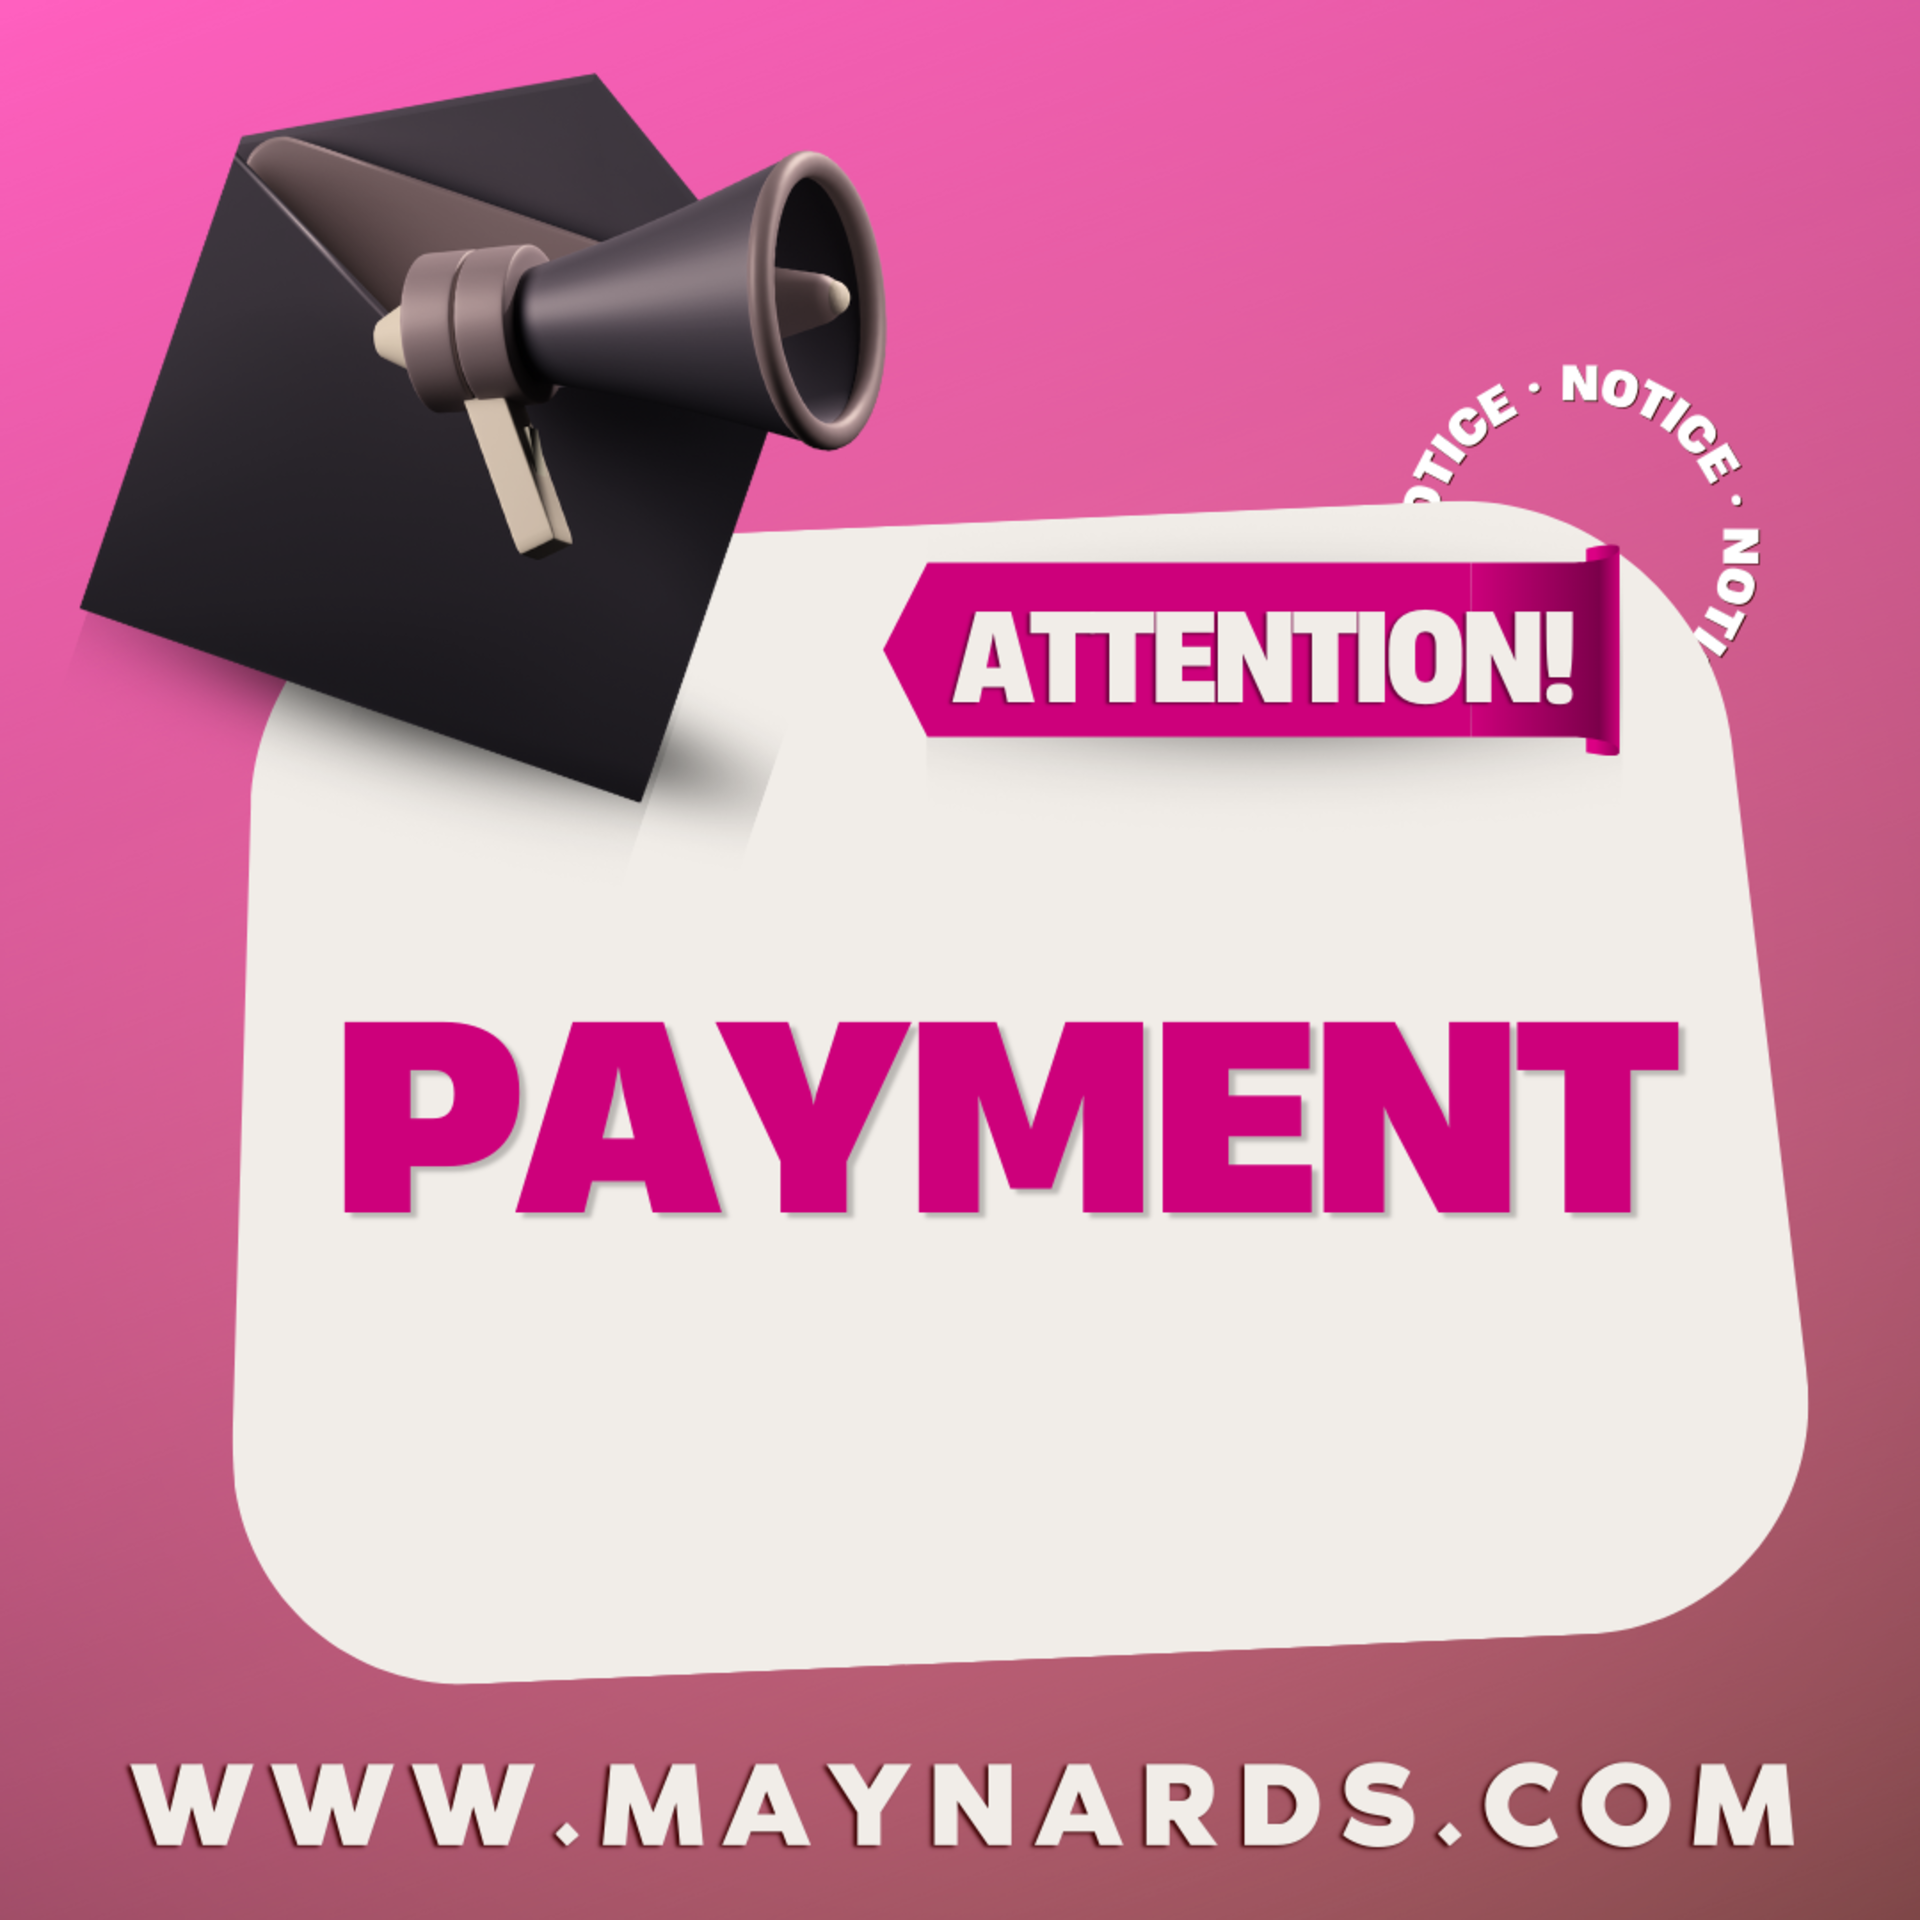 PAYMENT INSTRUCTIONS